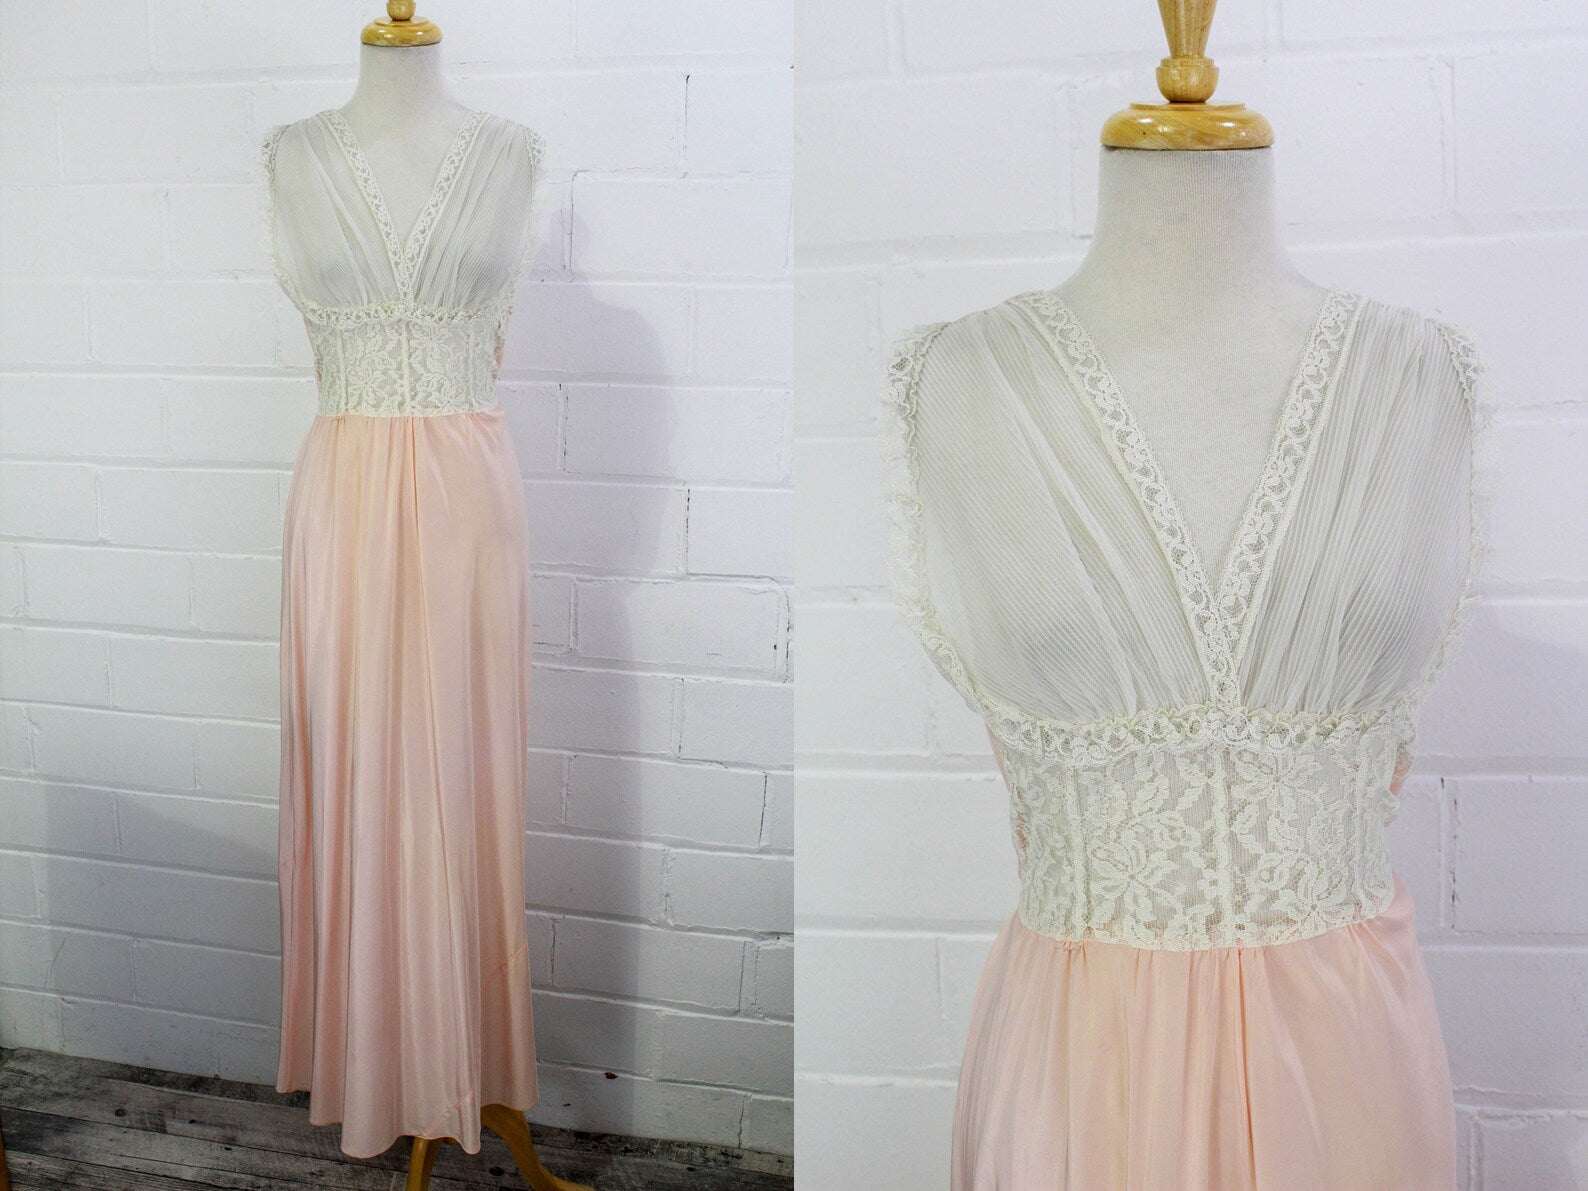 1950s Pink Nightgown with Sheer Ribbed Lace Bodice and Self Belt, Small, Vintage Slip Dress Lounge Dress, 1950s Fantasy Lingerie Ltd